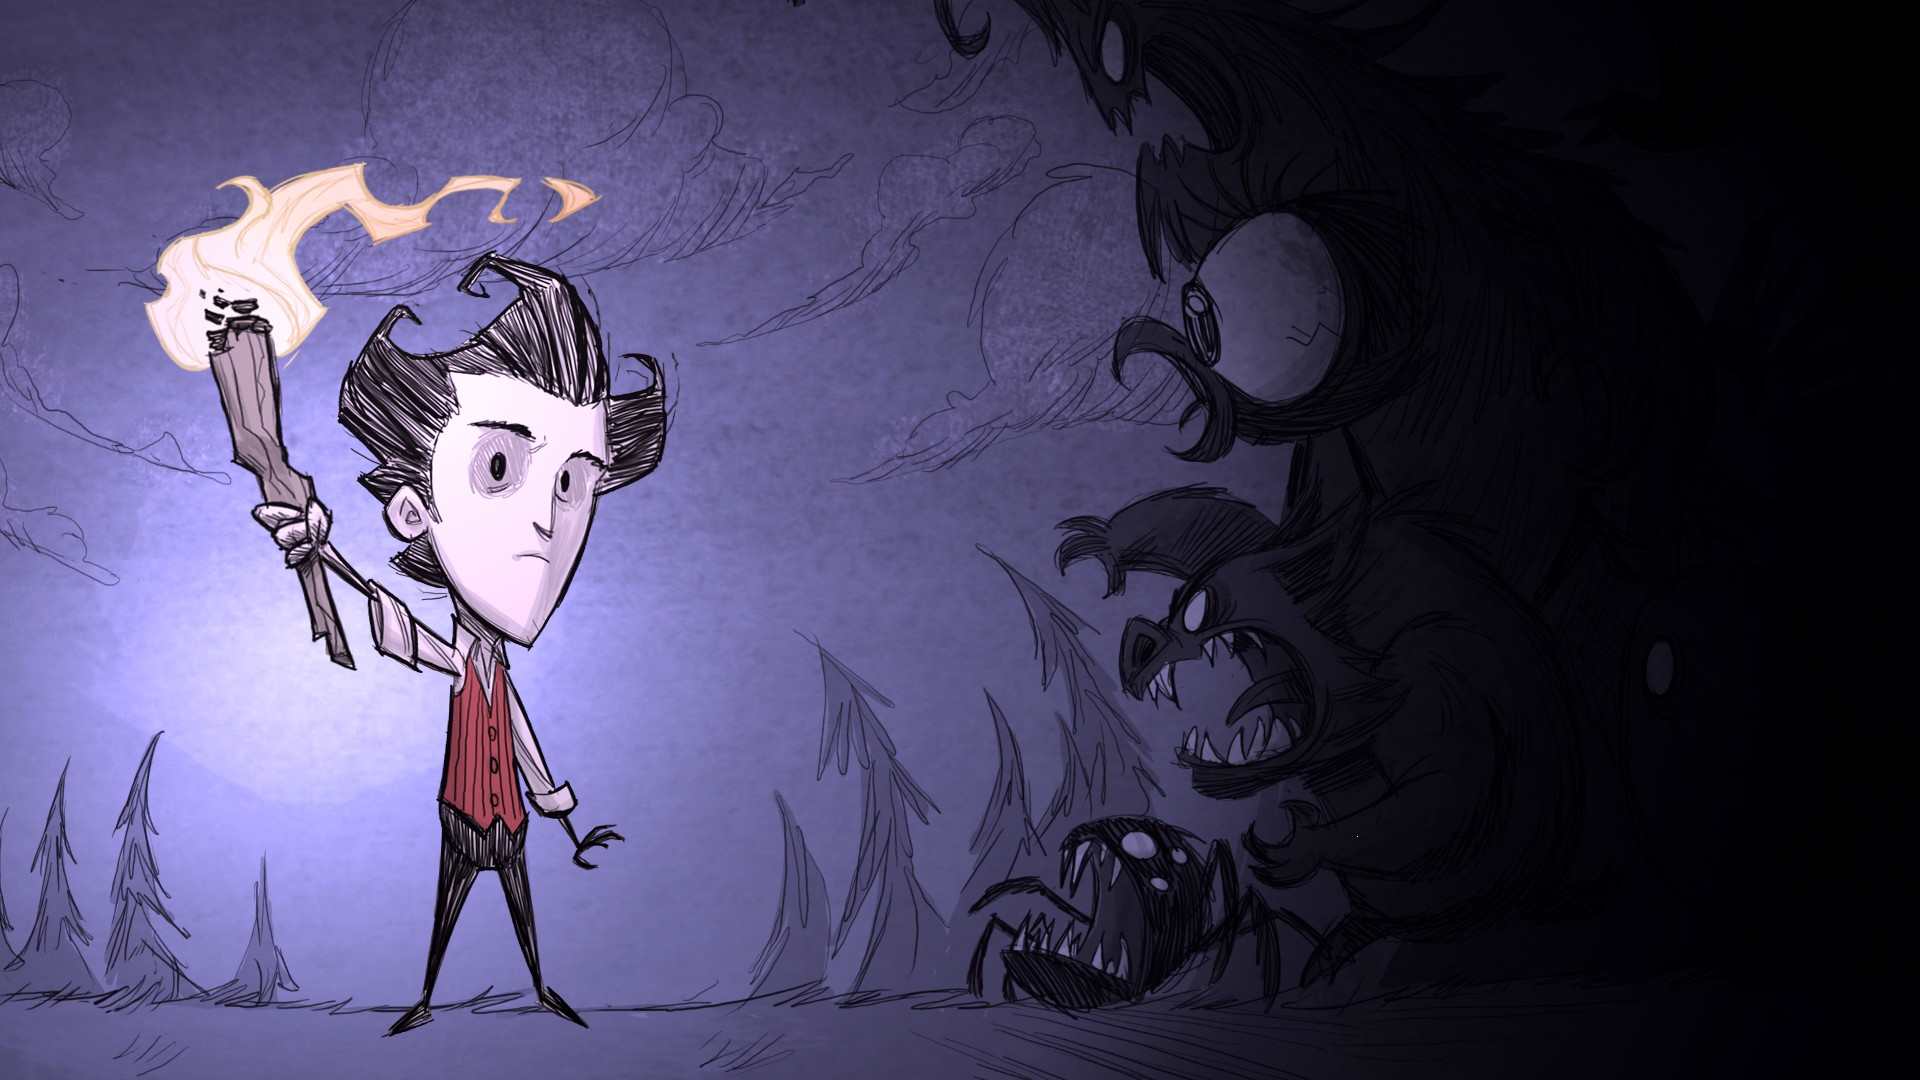 Don t start new. Don't Starve together фон. Уилсон don't Starve. ДСТ игра.